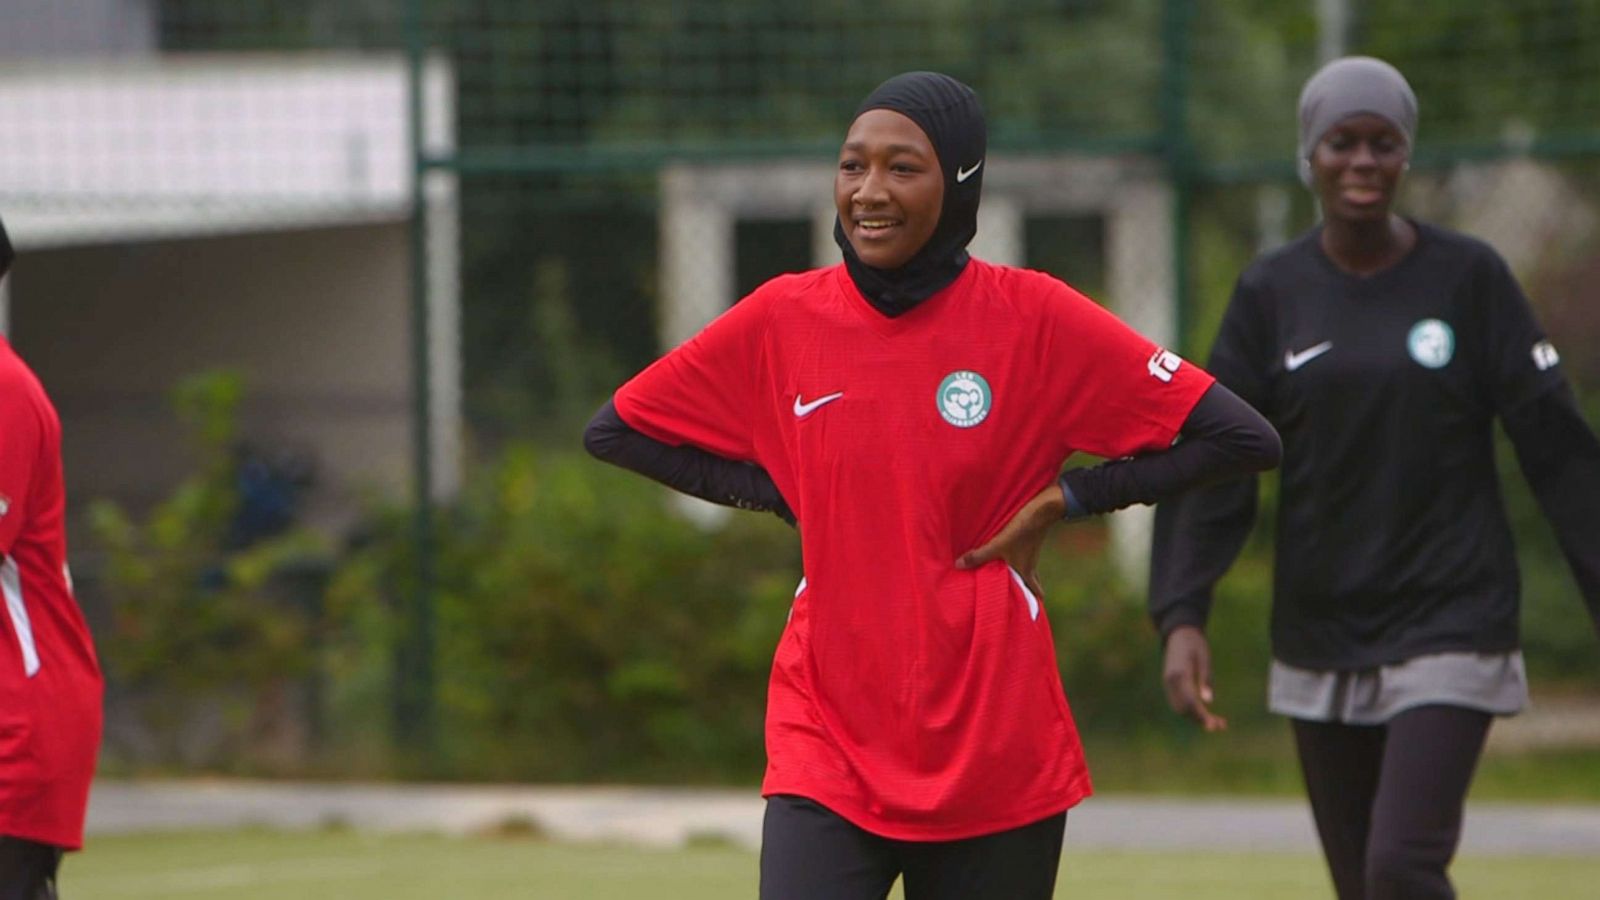 Hands off my hijab': French Muslims rail against ban on religious garb in  soccer - ABC News